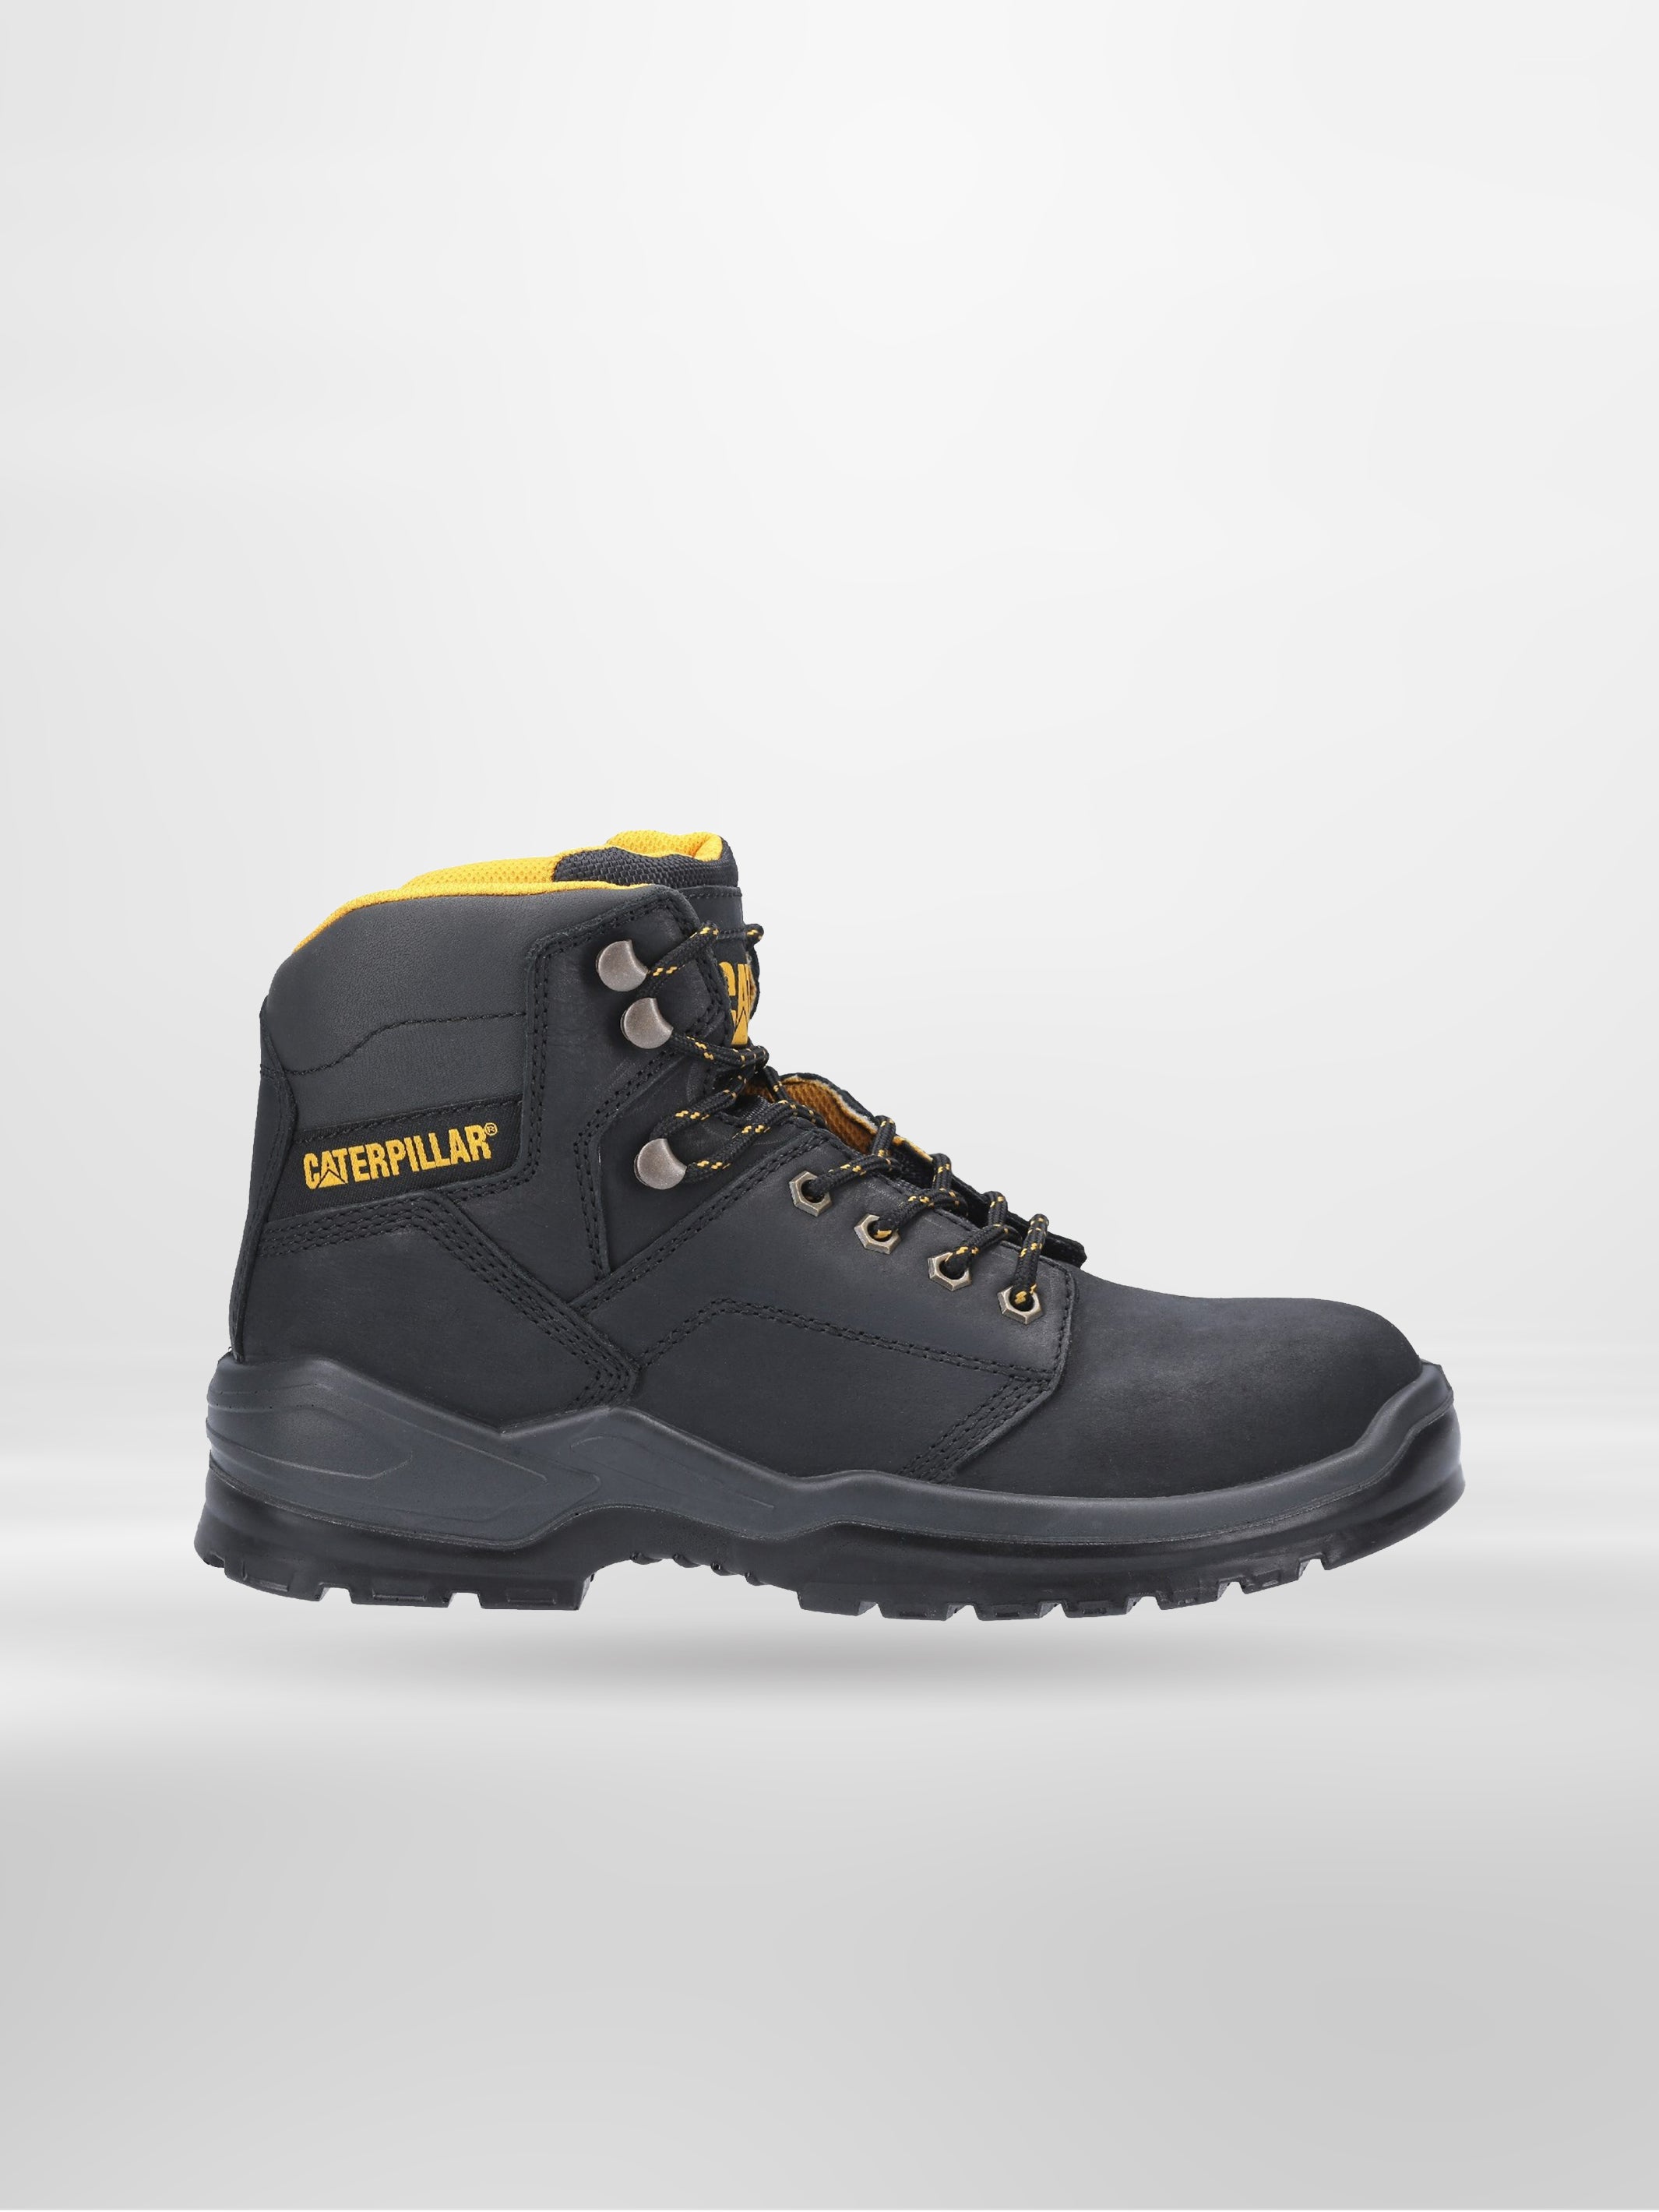 Caterpillar Mens Striver Injected Safety Boot